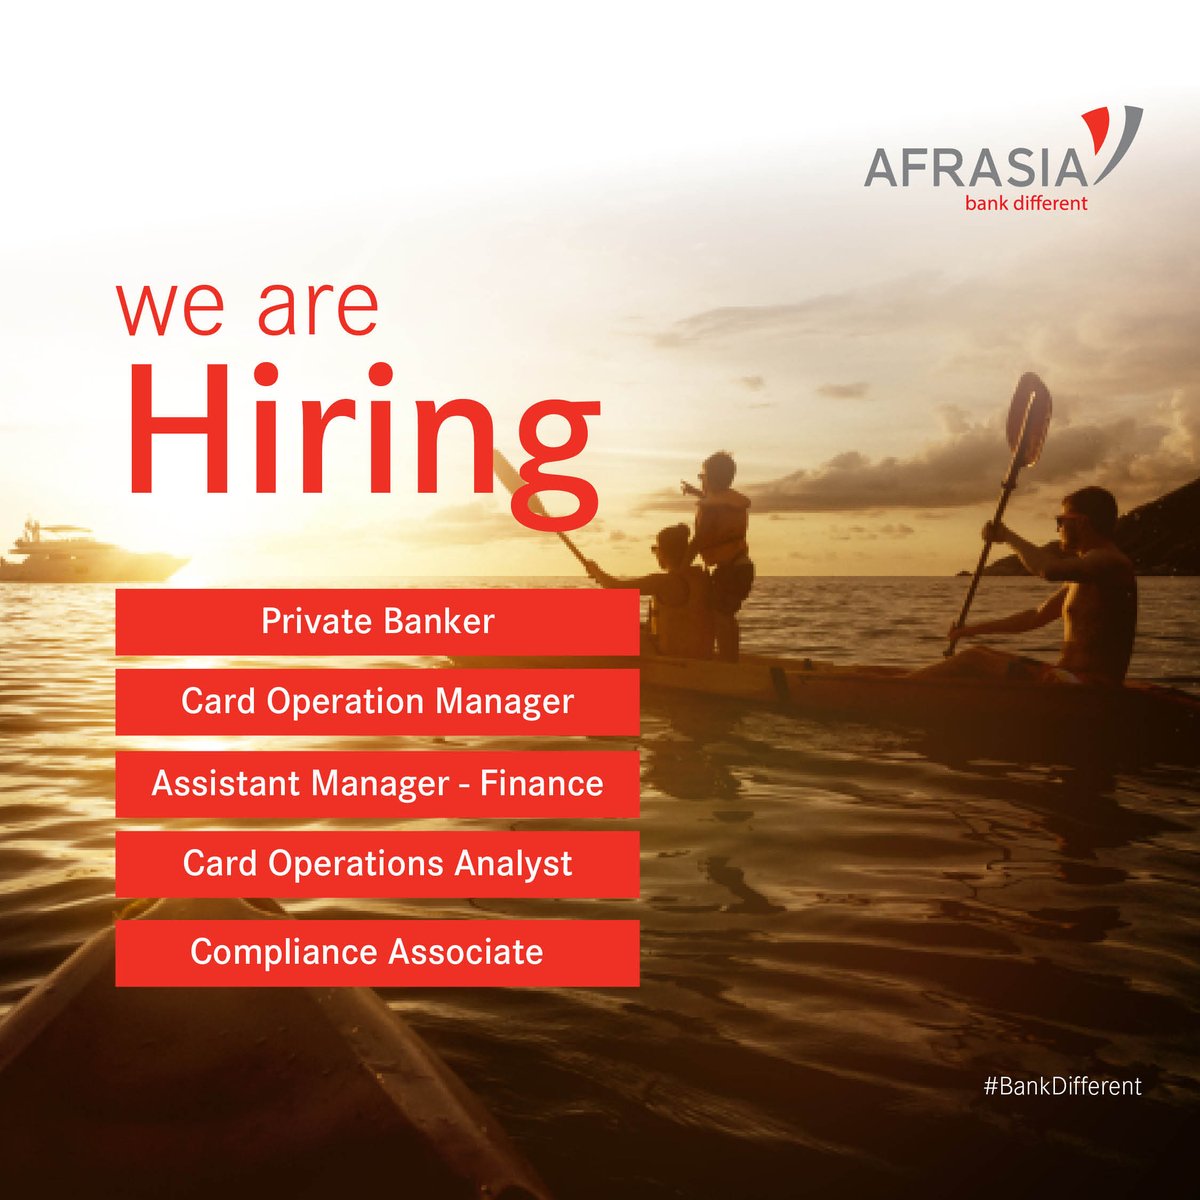 Embark on our #BankDifferent journey for exciting challenges and a rewarding career. Apply here 👉  bit.ly/3JPHZiO #CareerOpportunities #SailWithAfrAsia #LifeAtAfrAsia